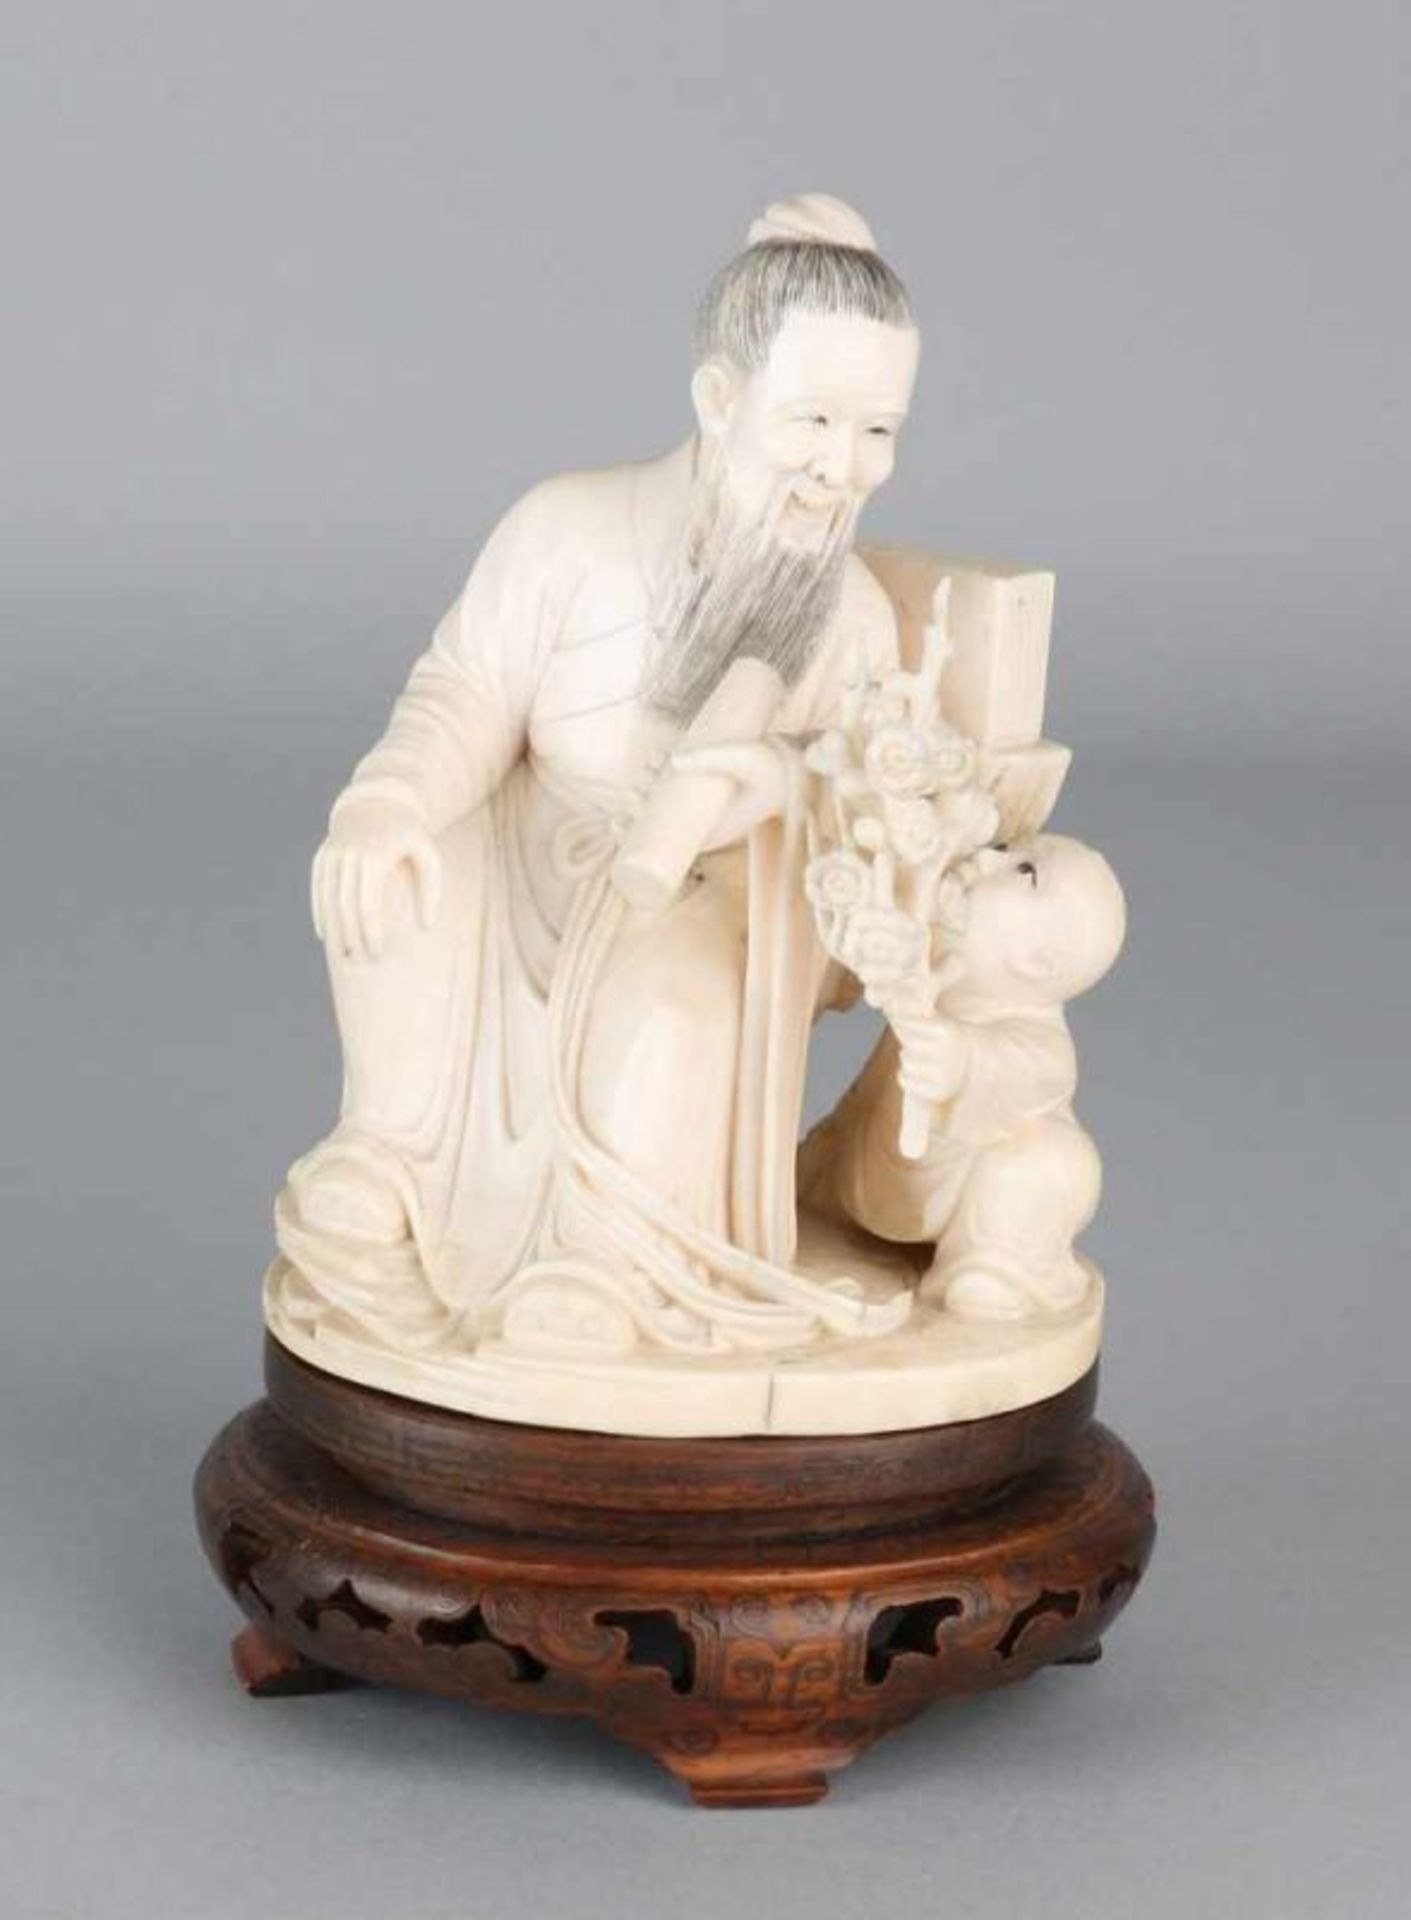 19th century Japanese ivory figure. Japanese old man with child and blossom branch. On a wood